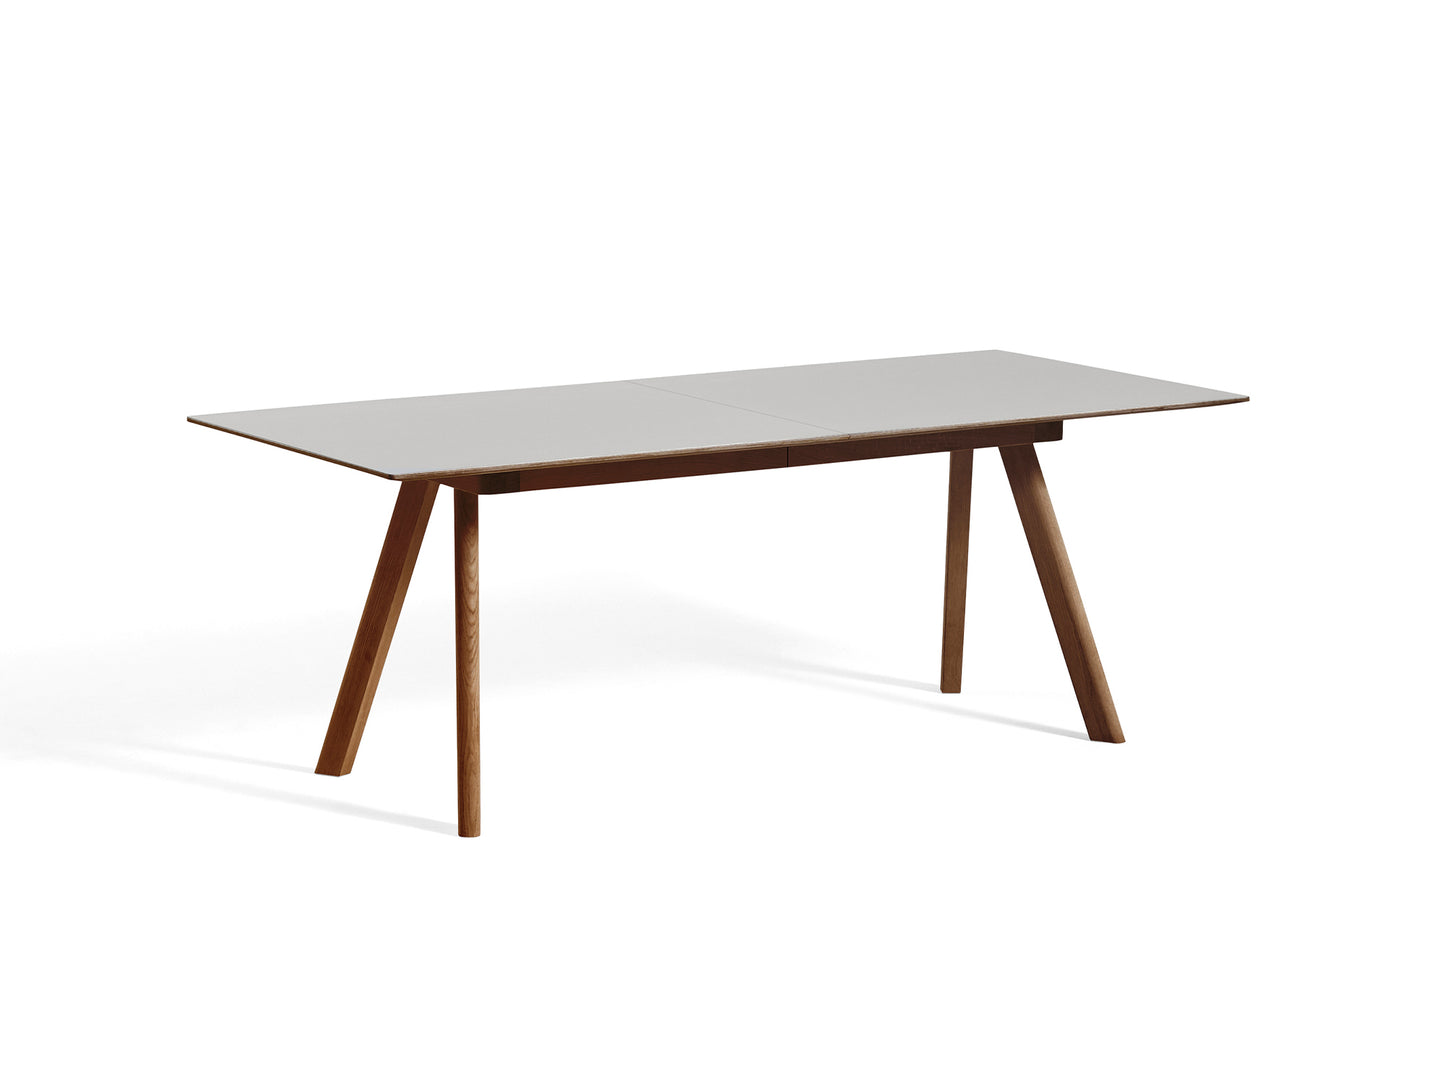 CPH30 Extendable Dining Table by HAY - L200 cm / Pebble Grey Linoleum Tabletop with Lacquered Walnut Oak Base